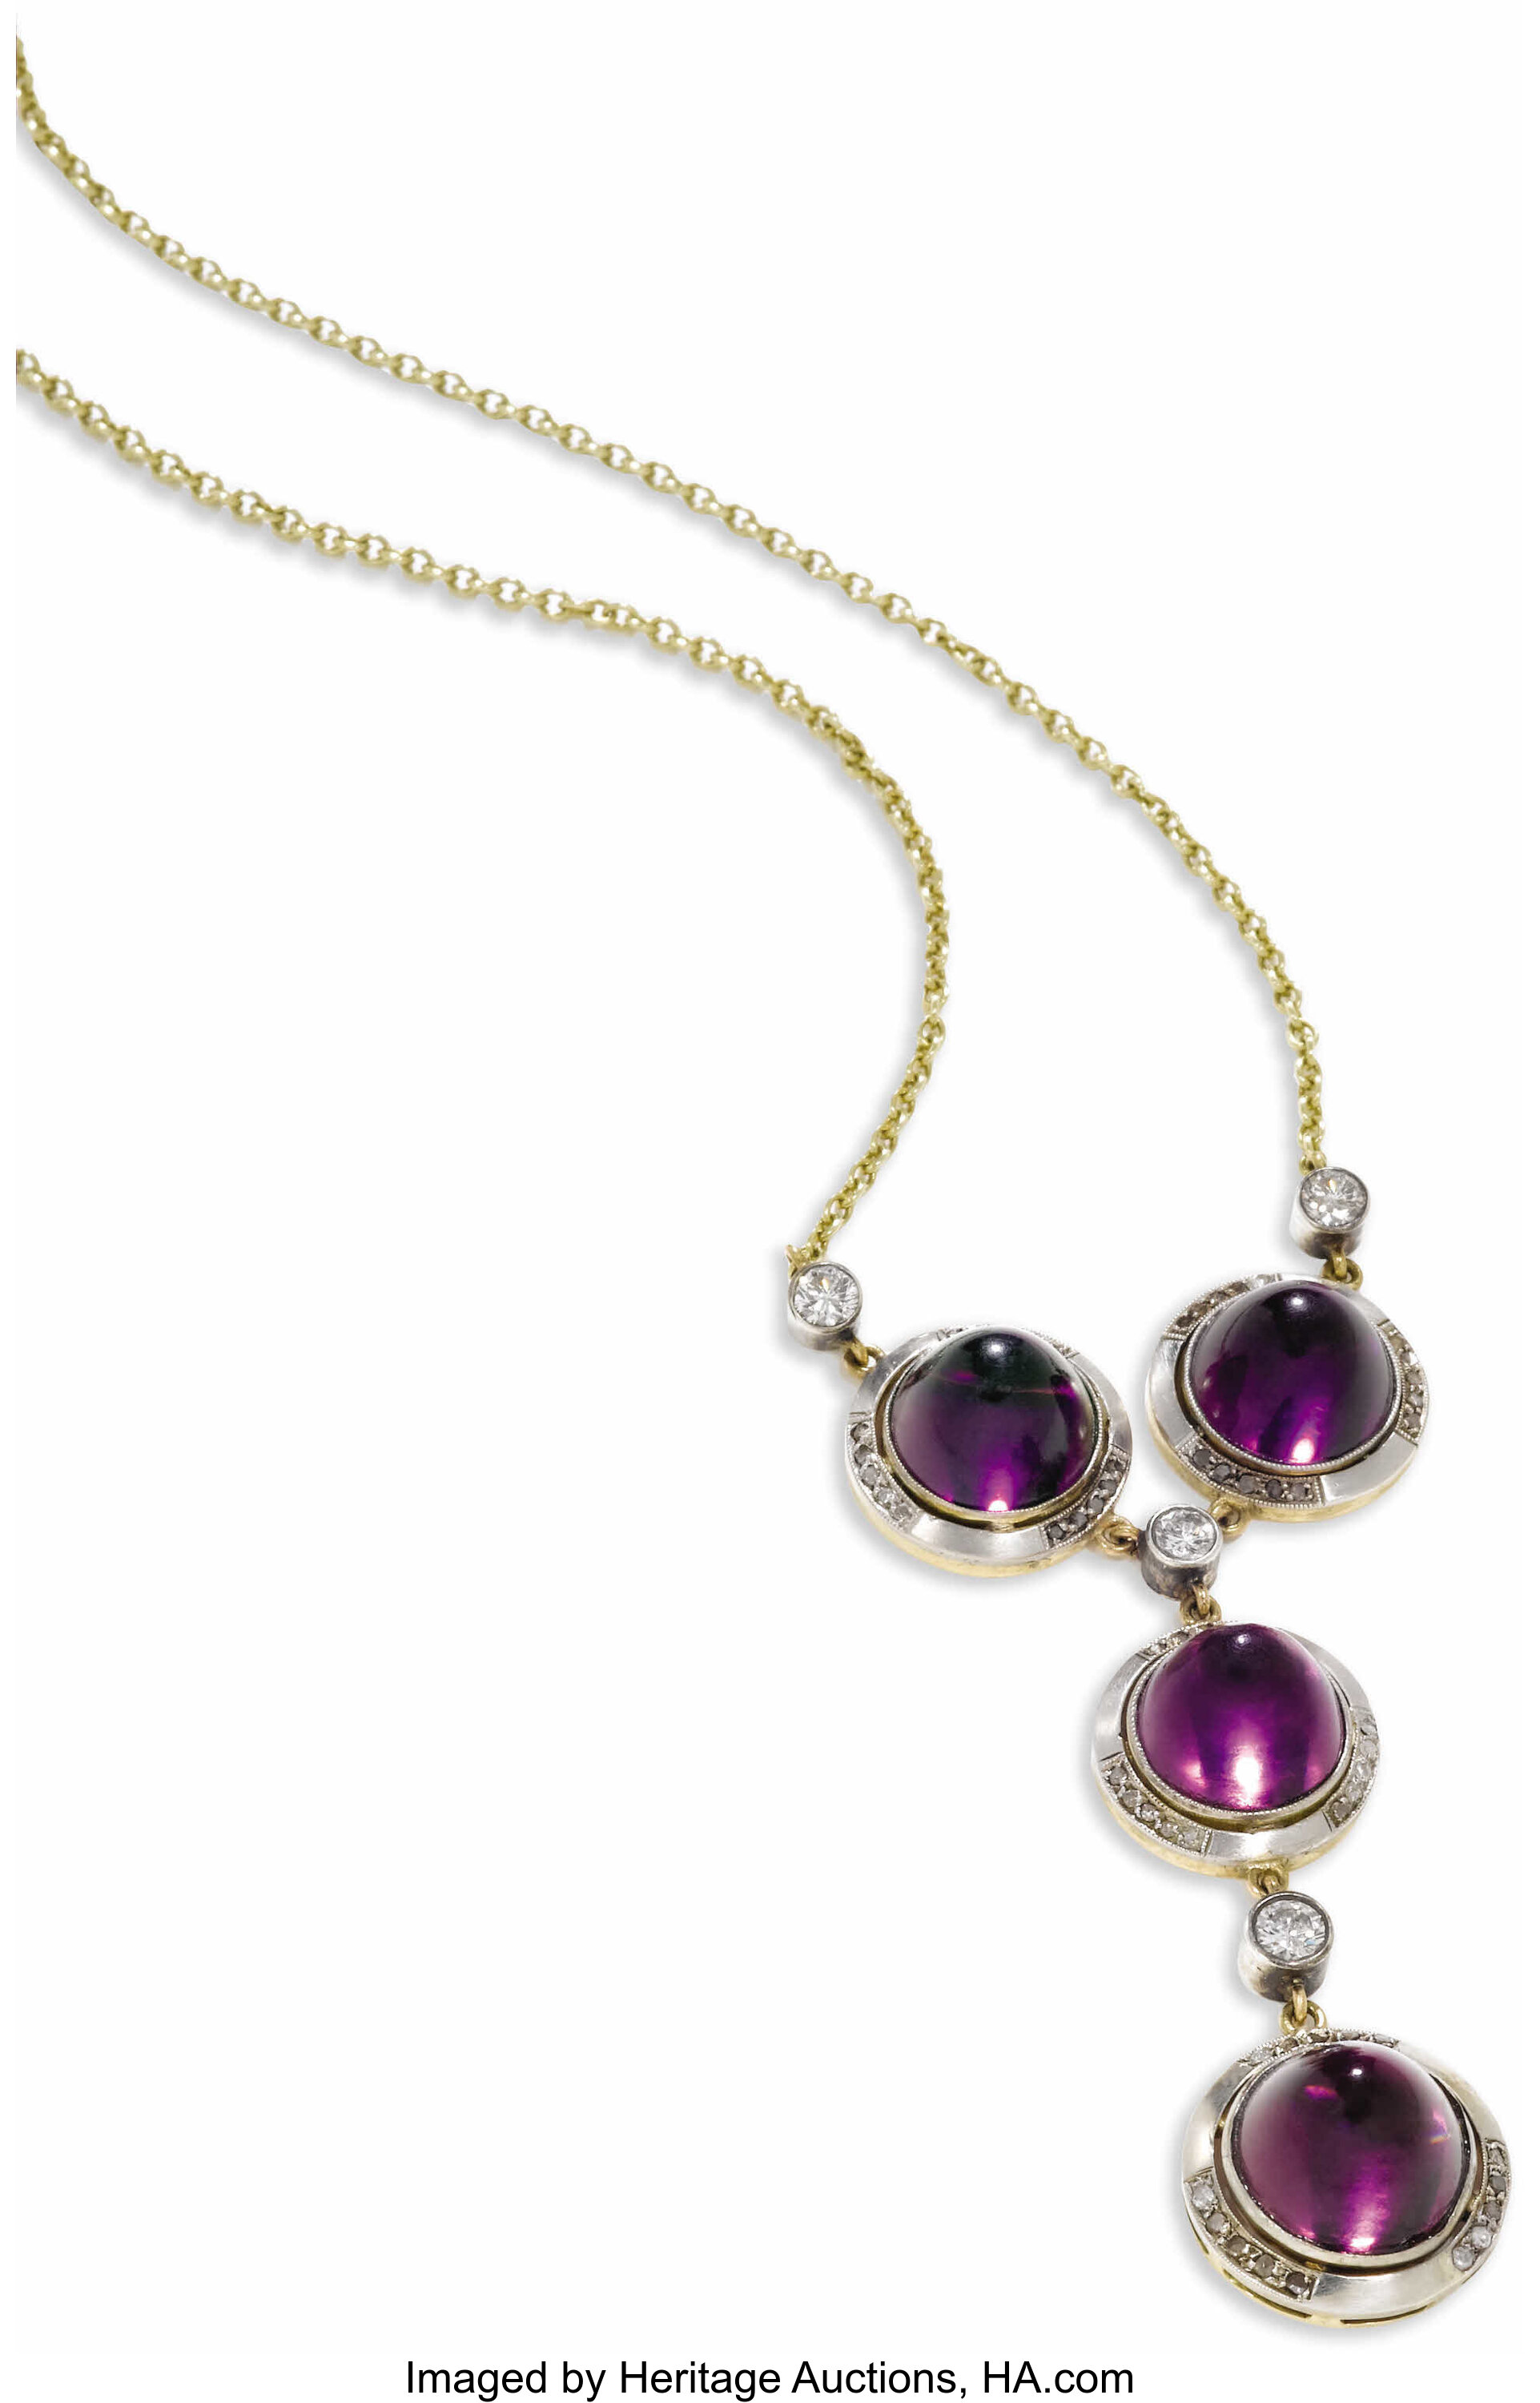 Amethyst, Diamond, Gold Necklace. The Y-style necklace features | Lot ...